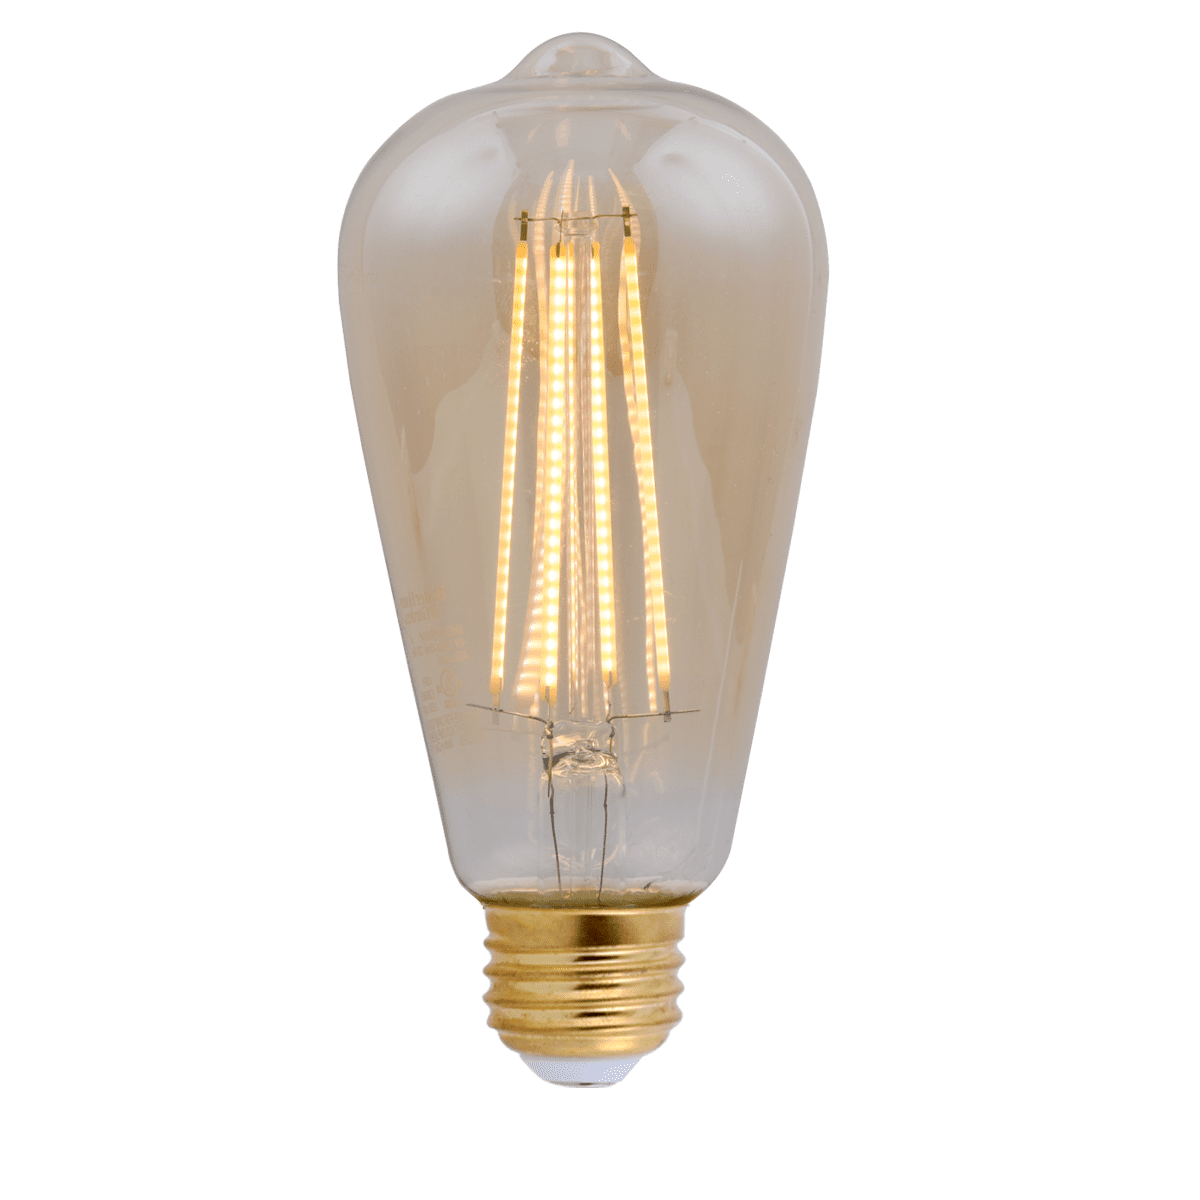 Better Homes & Gardens LED Vintage Style Light Bulb,ST19 40 Watts Amber Classic Filament, Medium Base, Dimmable, 2 Pack